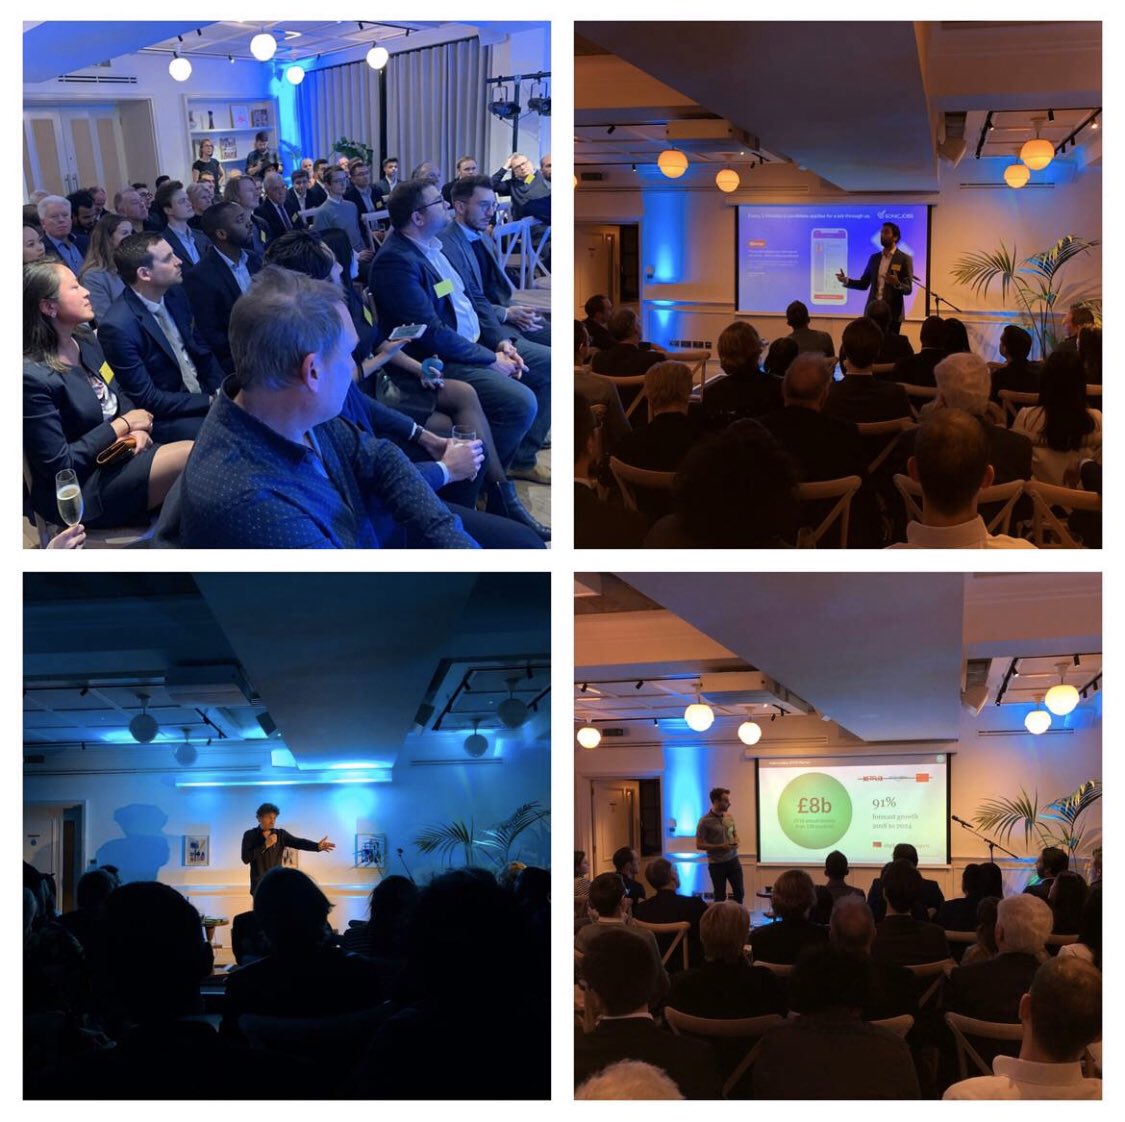 Thank you for attending the Velocity Comedy & Canapè Night. We hope you had fun, and enjoyed meeting our investee companies. See you at the next one! #eis #taxefficientinvesting